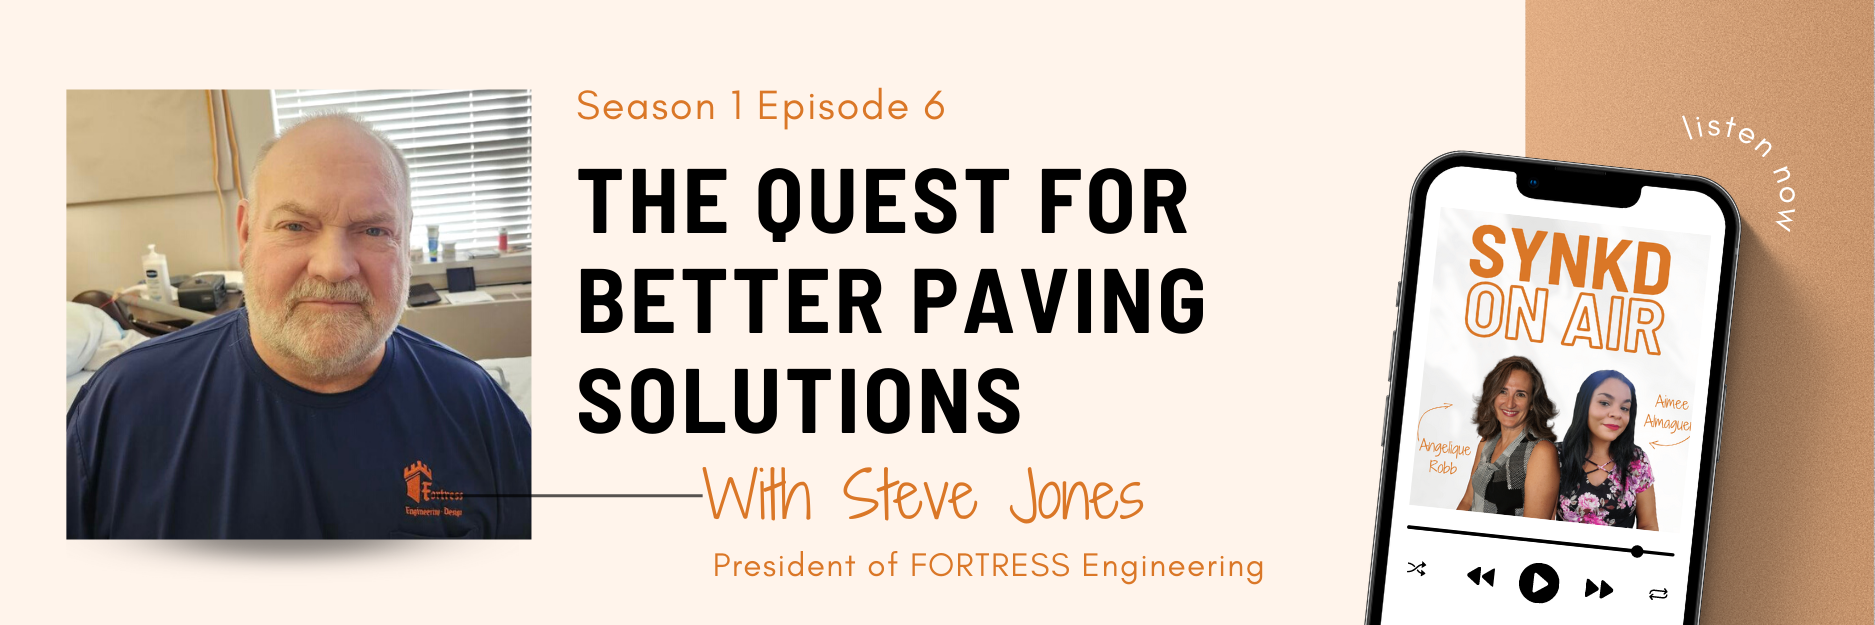 The Quest for Better Paving Solutions with Steve Jones, President of FORTRESS Engineering